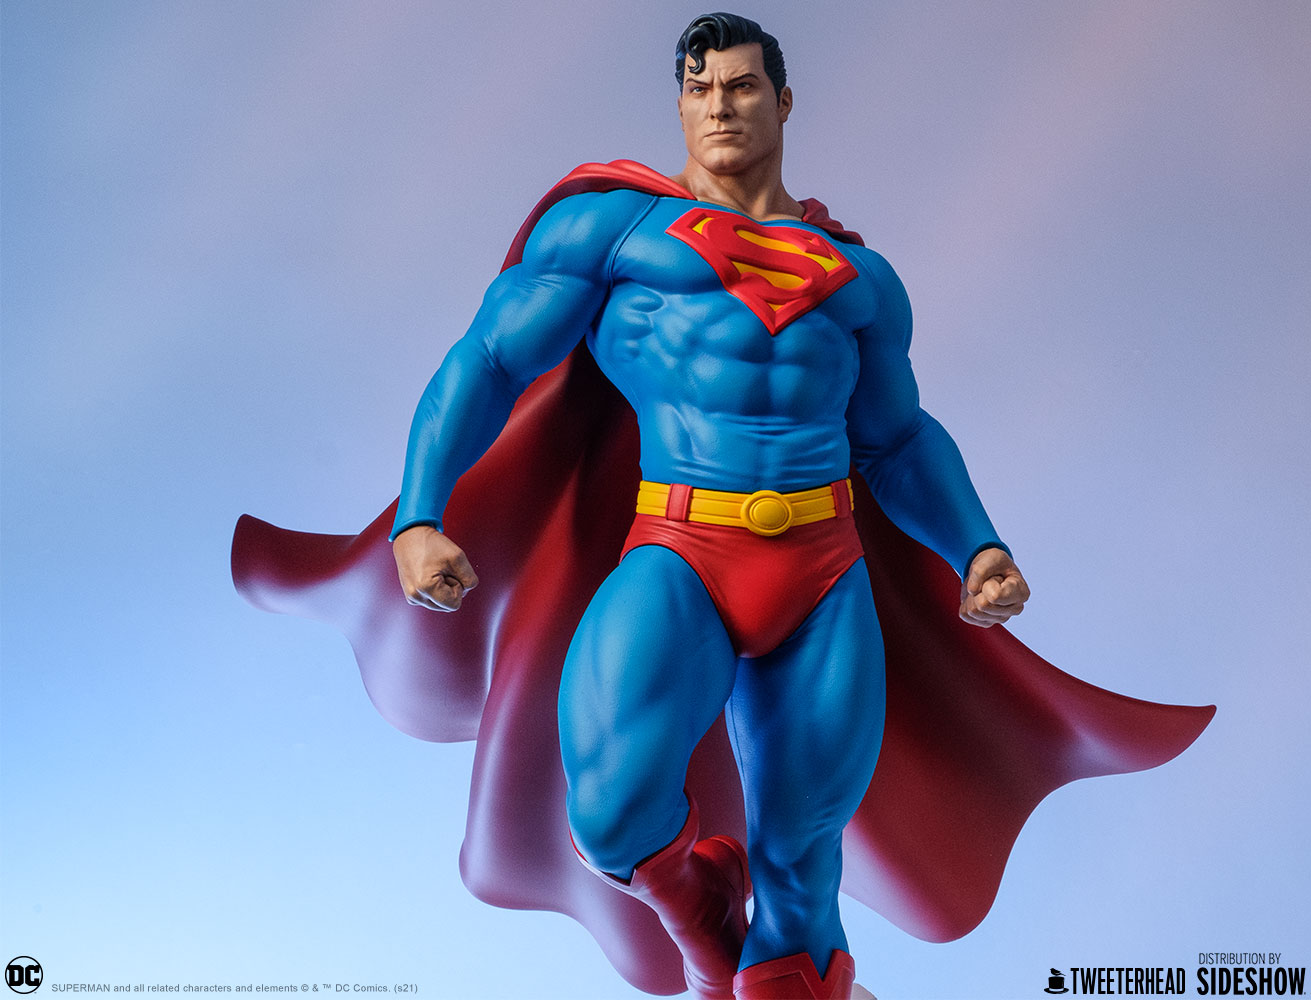 https://www.sideshow.com/storage/product-images/907776/superman_dc-comics_gallery_602d4d07388bf.jpg